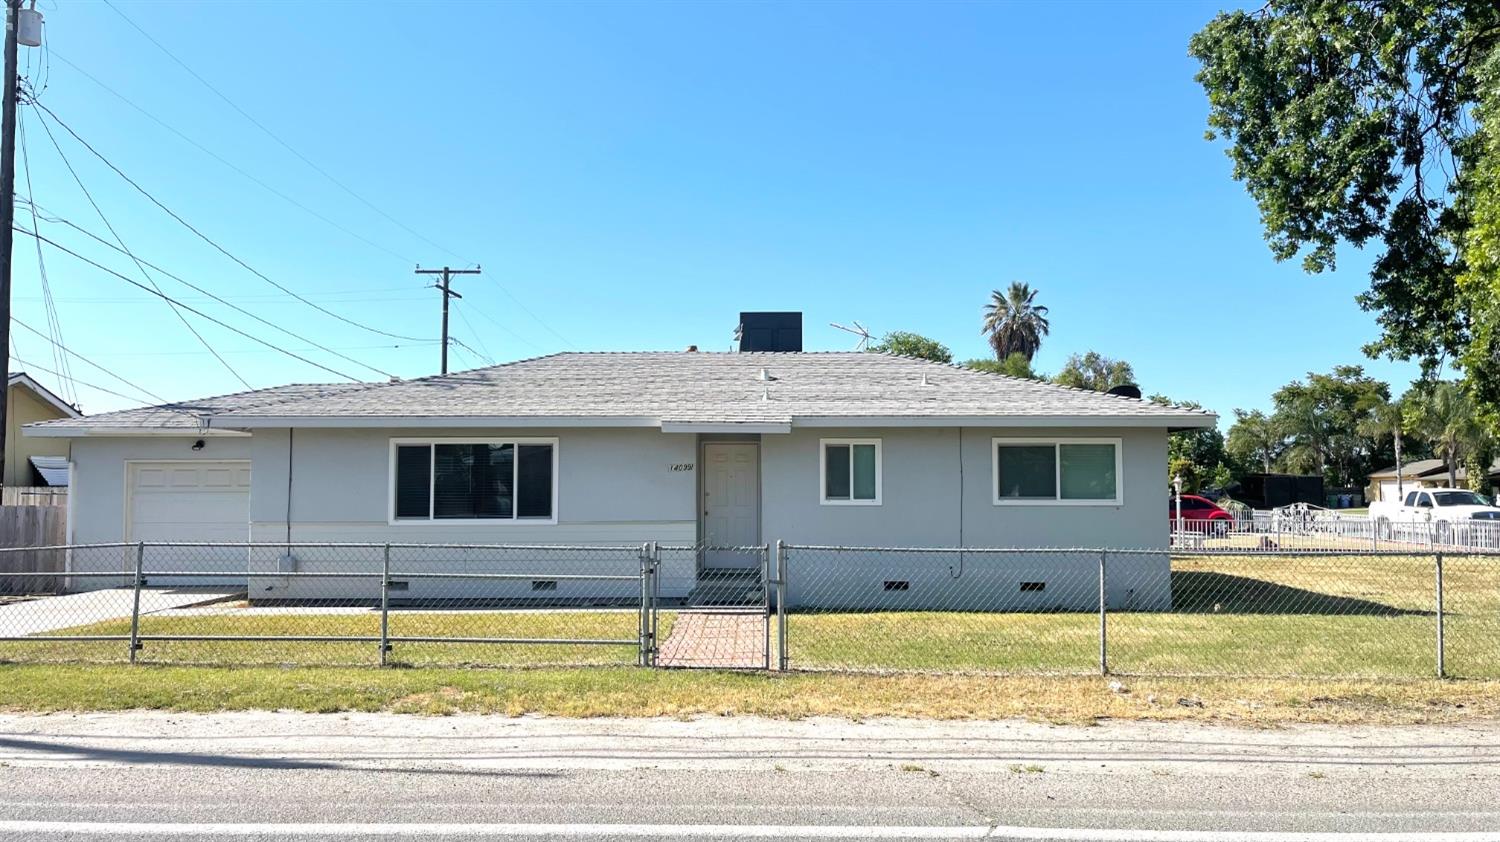 Photo of 14099 Hanford Armona Rd in Armona, CA